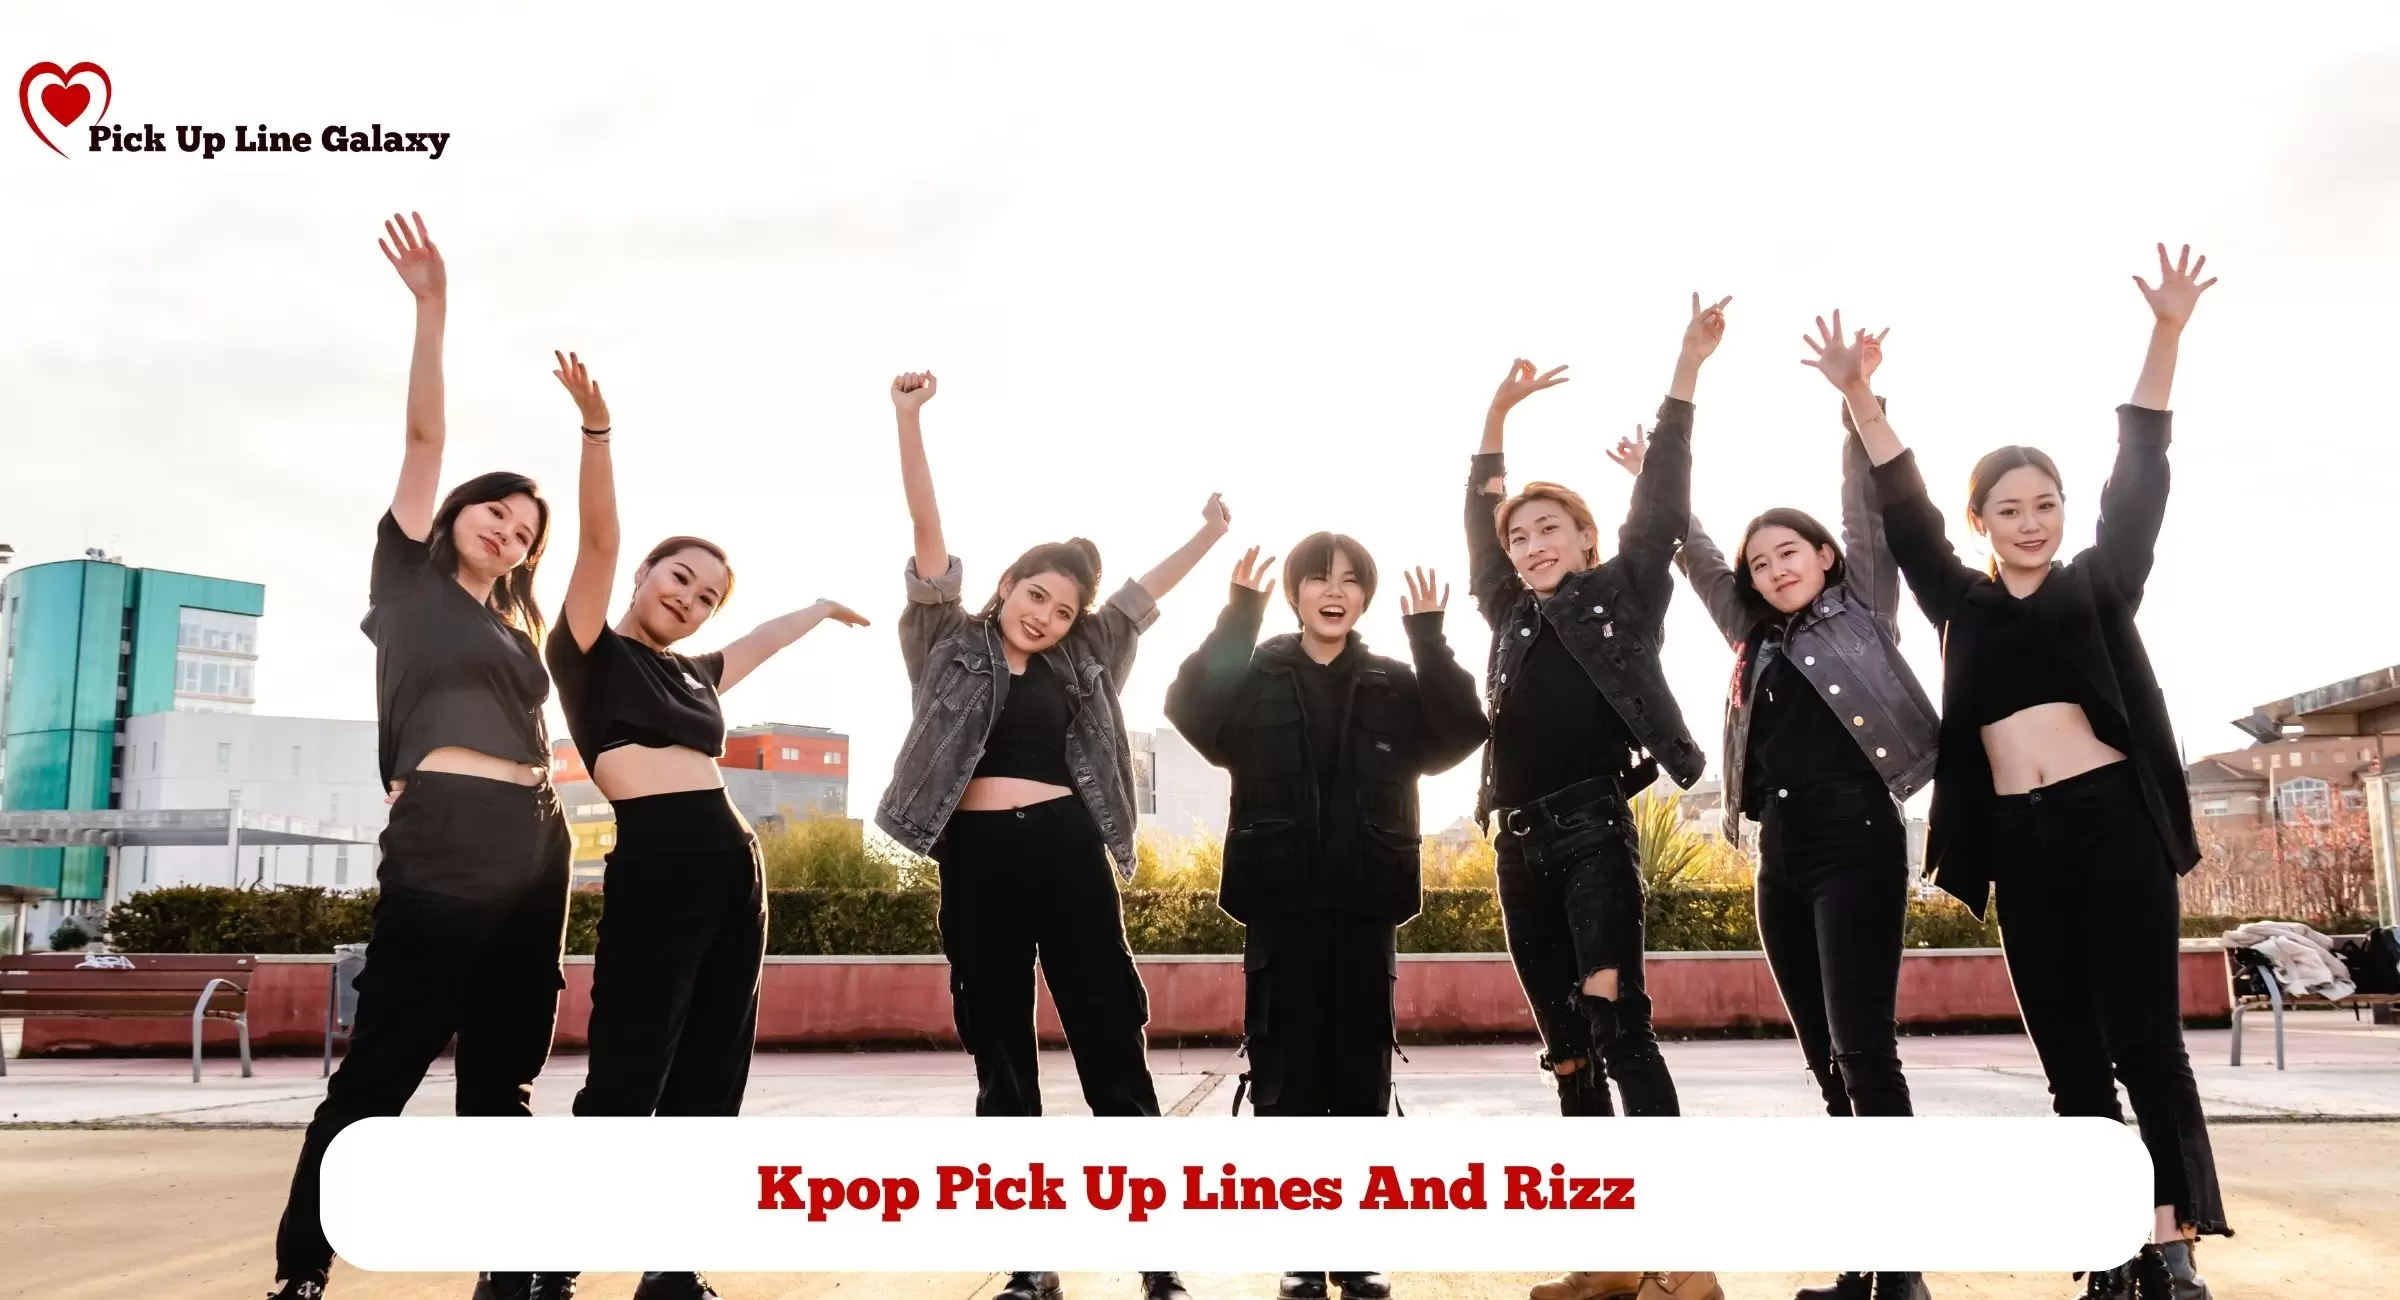 Kpop Pick Up Lines And Rizz